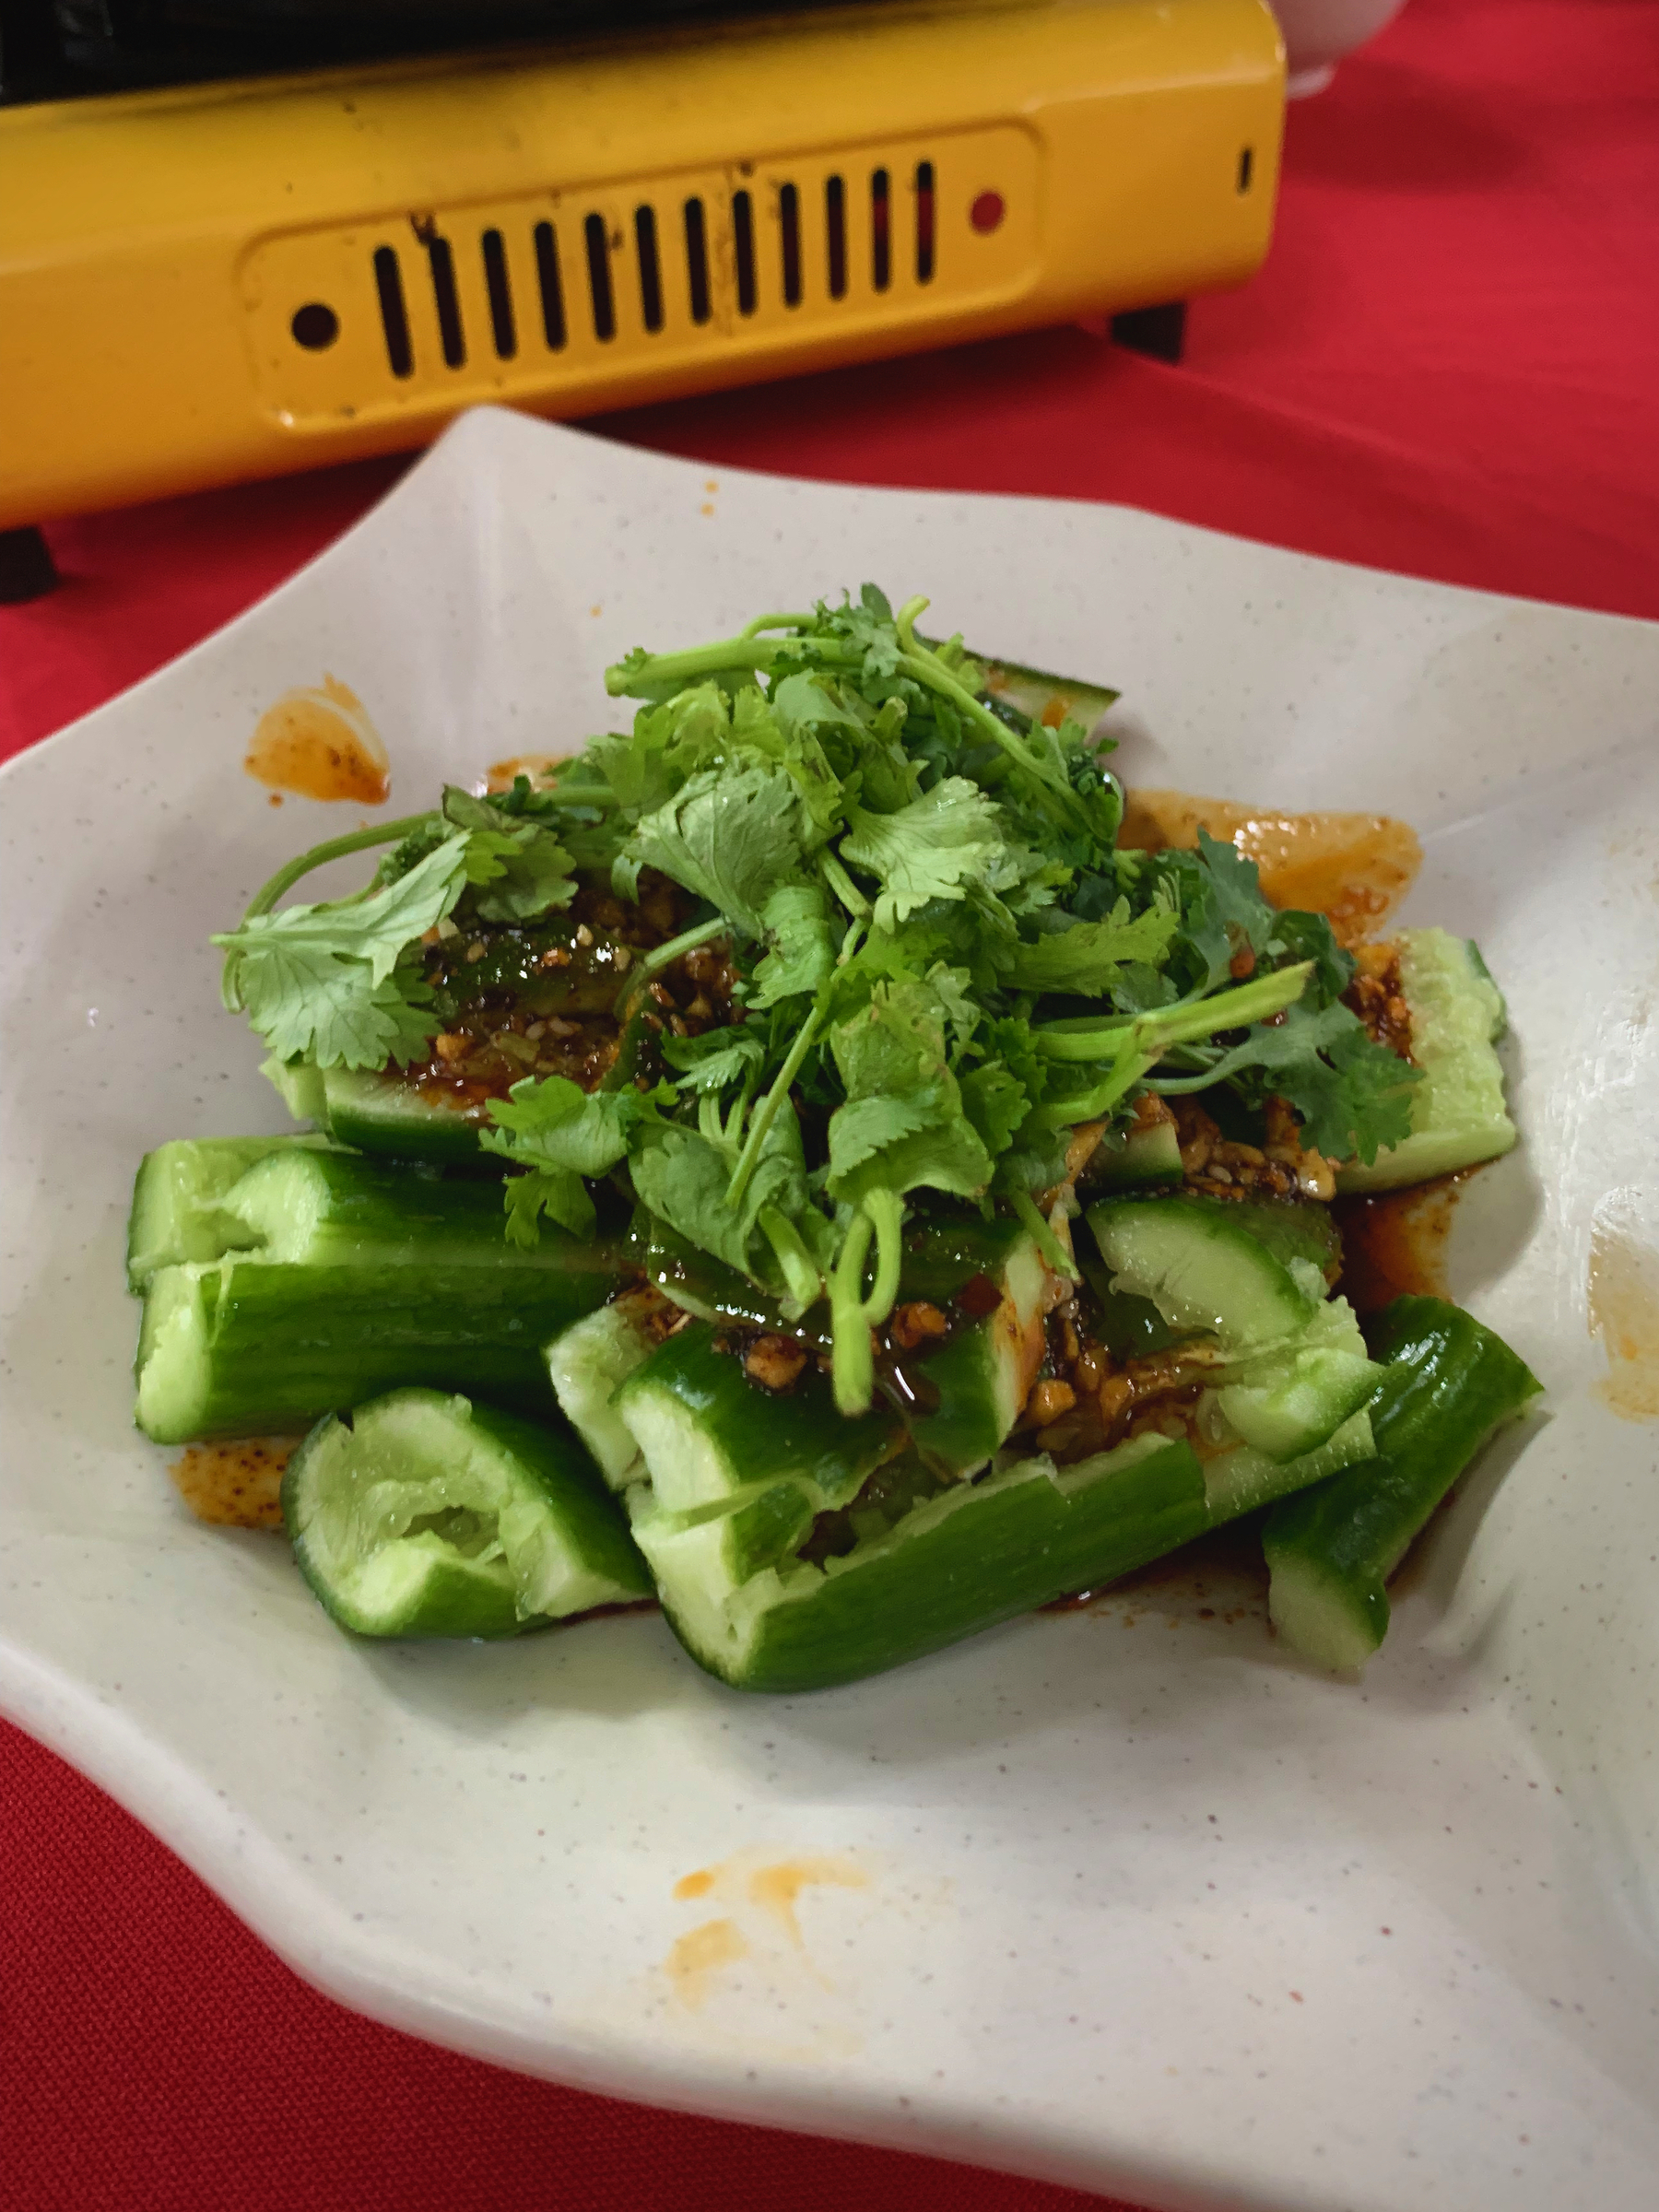 Cucumber smashed and spiced with some chilli oil